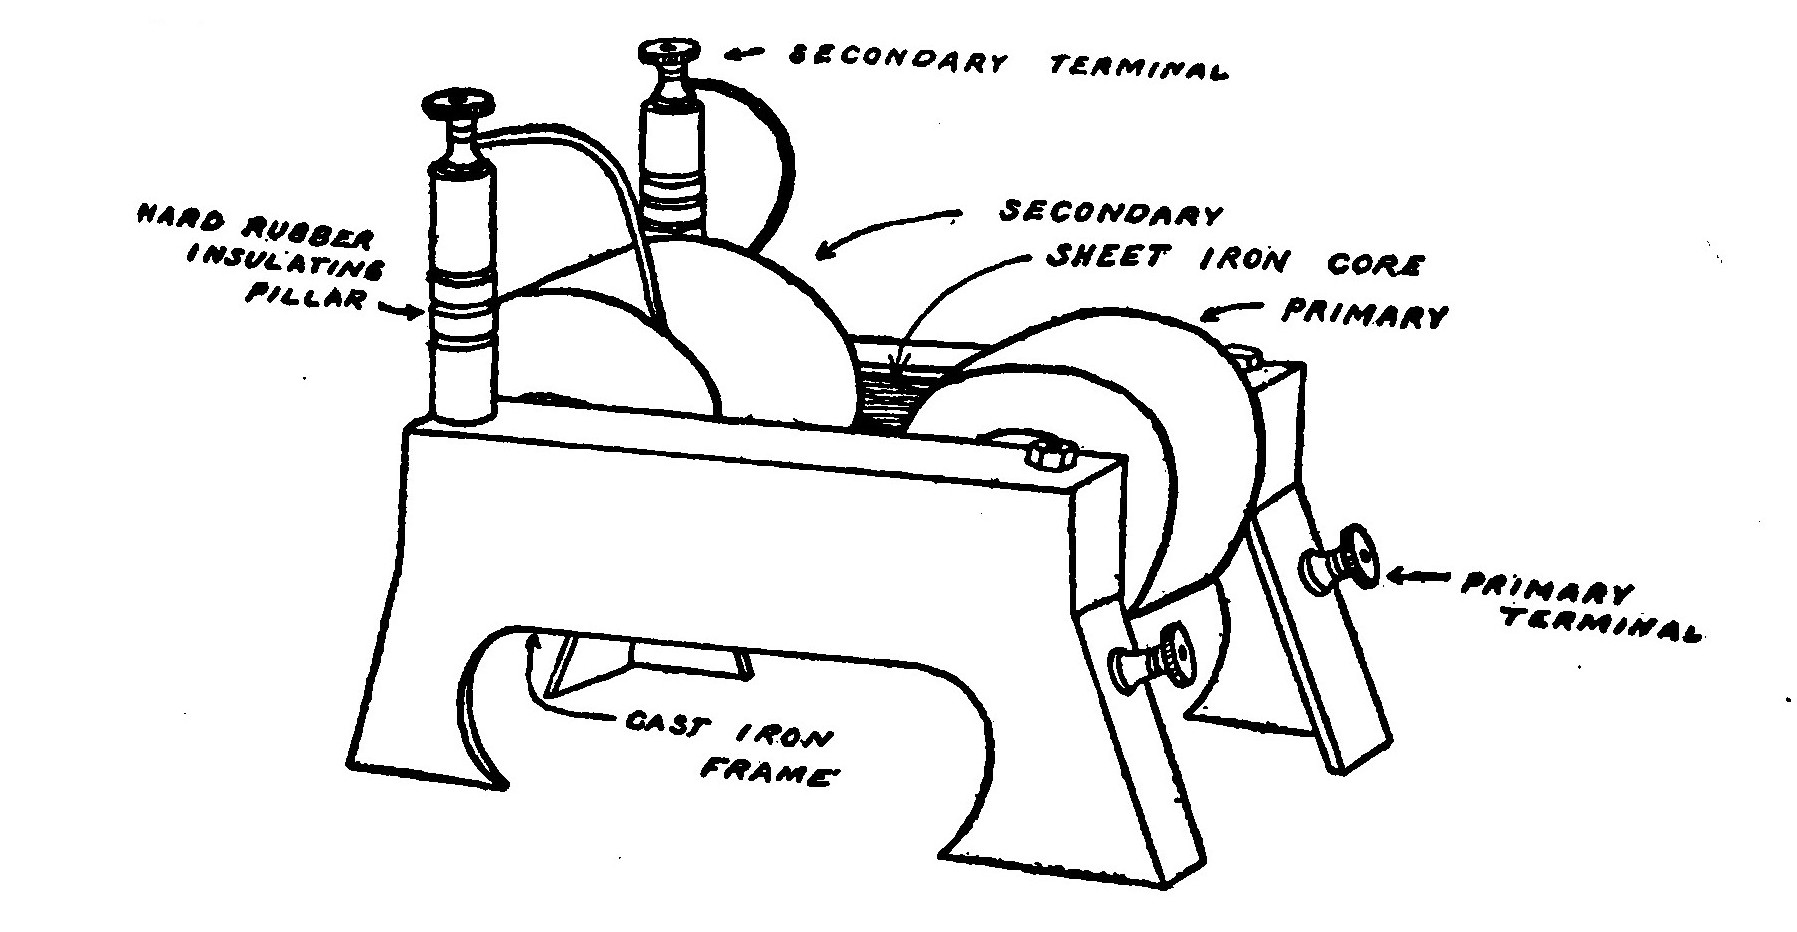 FIG. 33. High Potential Closed Core Transformer.